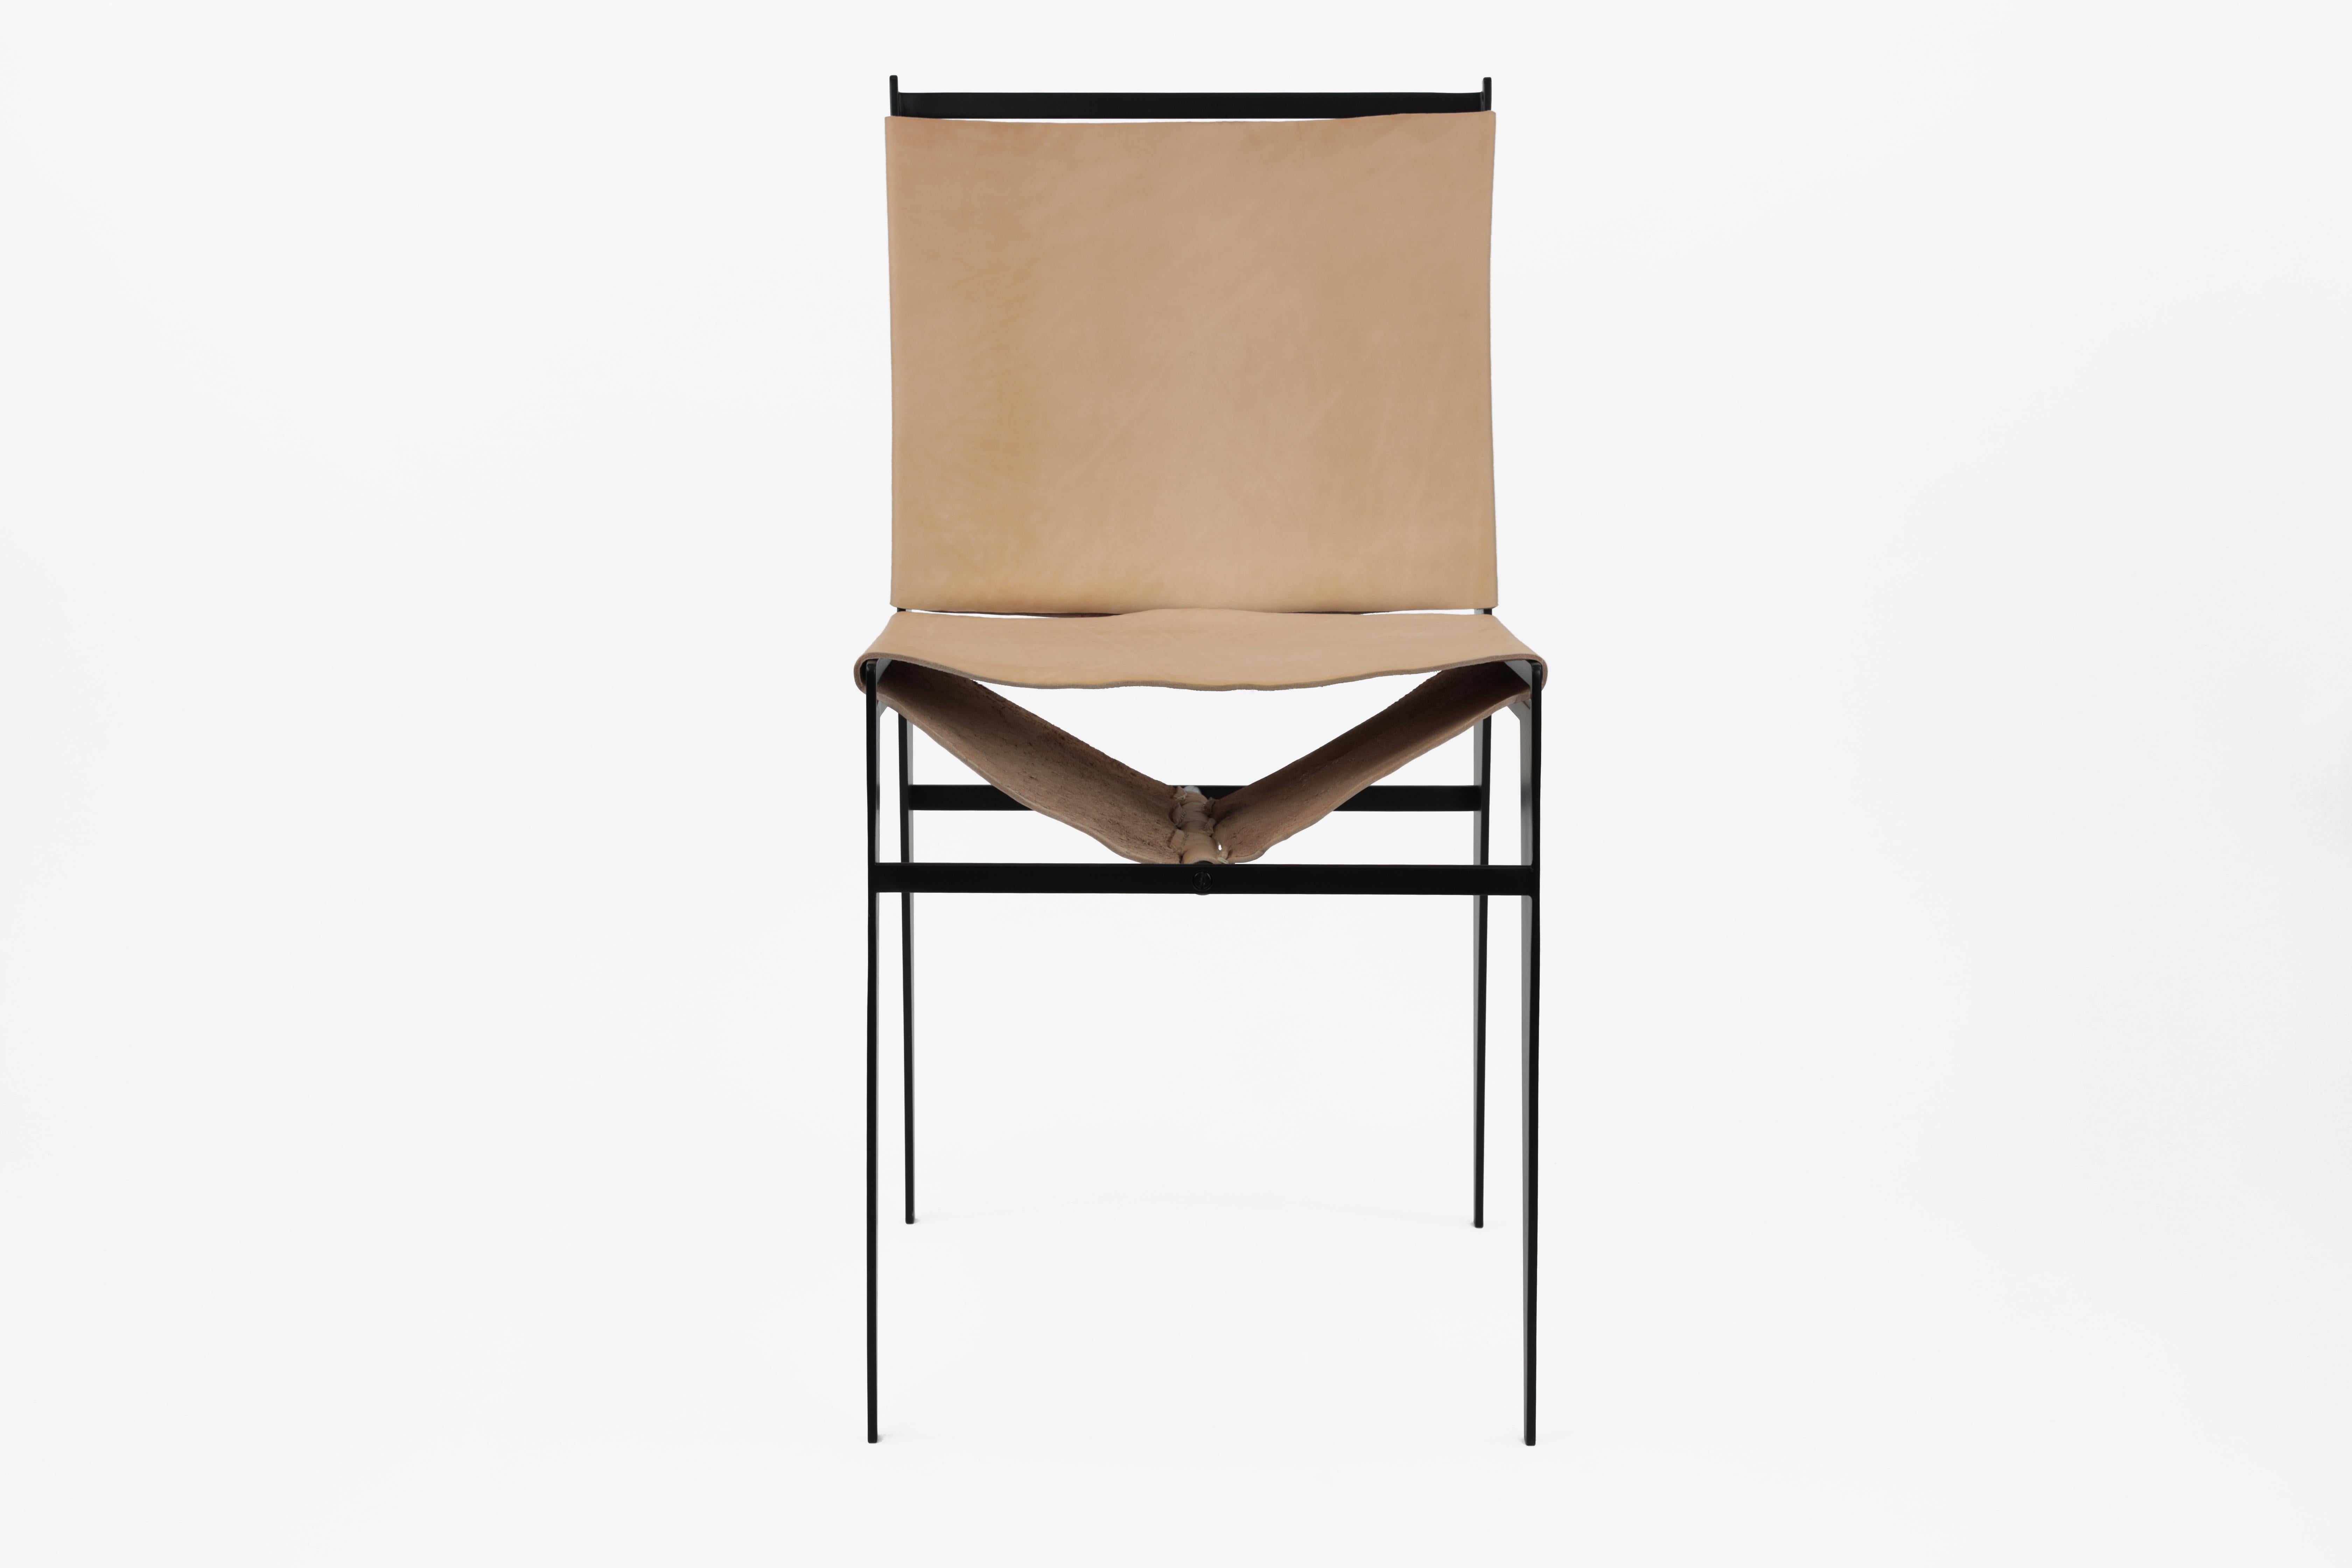 The Icon Chair is made of steel and has a black powder-coated finish. Its joints are meticulously welded, creating a streamlined design. The lines of the frame and leather create geometric shapes that change from every angle. The leather is piano